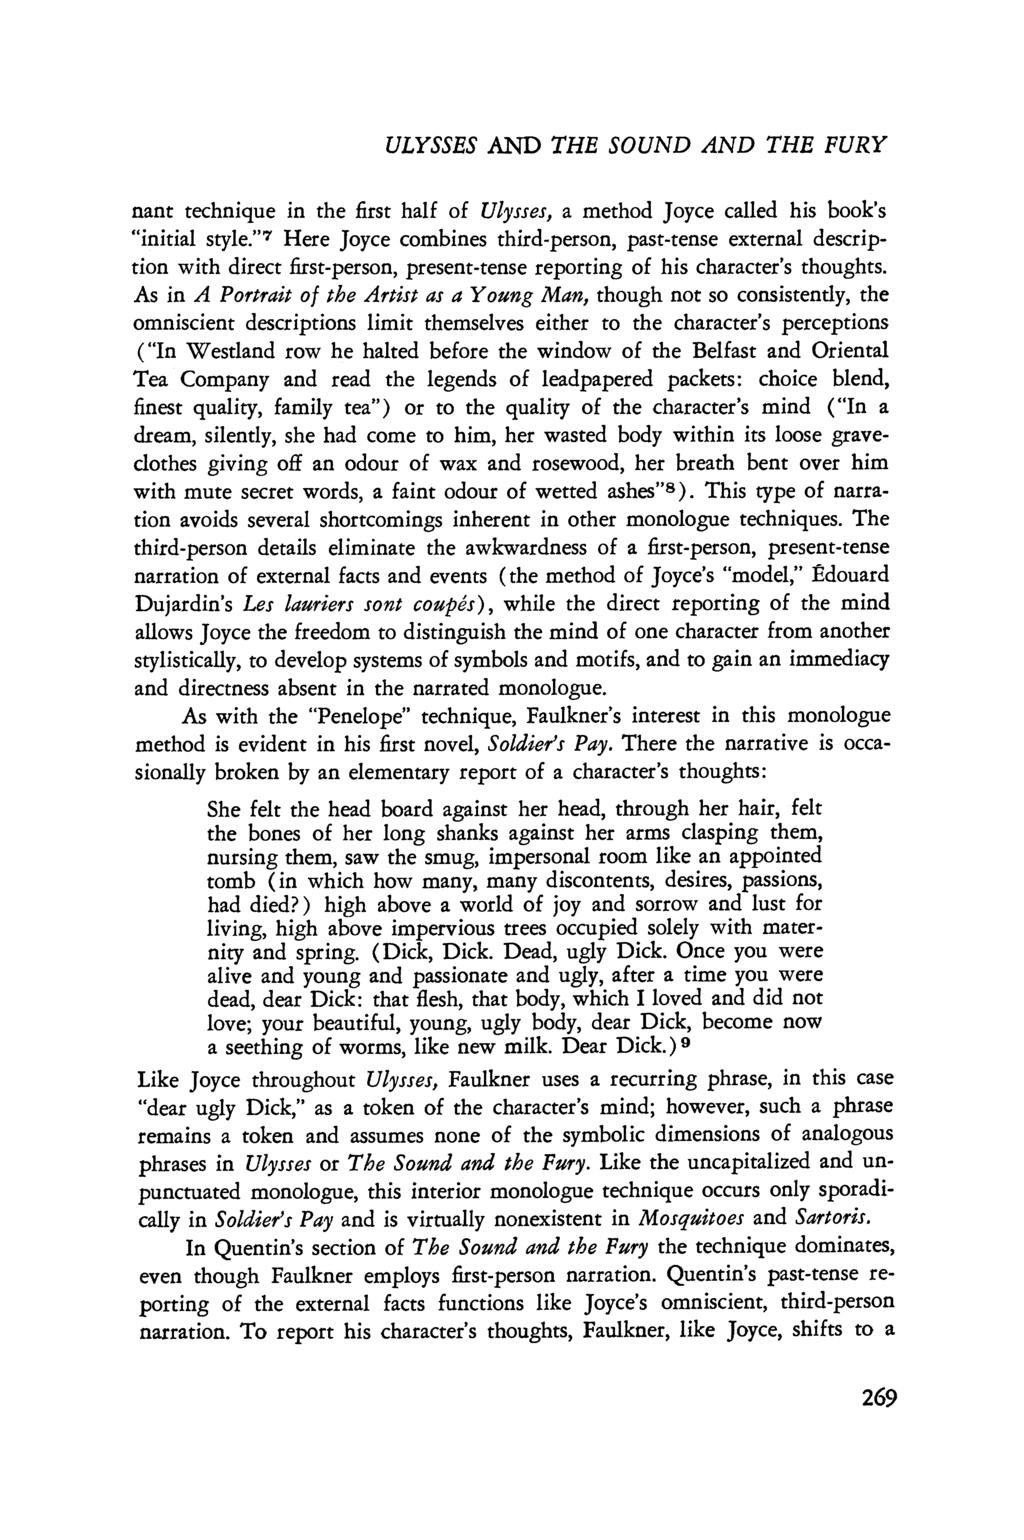 ULYSSES AND THE SOUND AND THE FURY nant technique in the first half of Ulysses, a method Joyce called his book's "initial style.